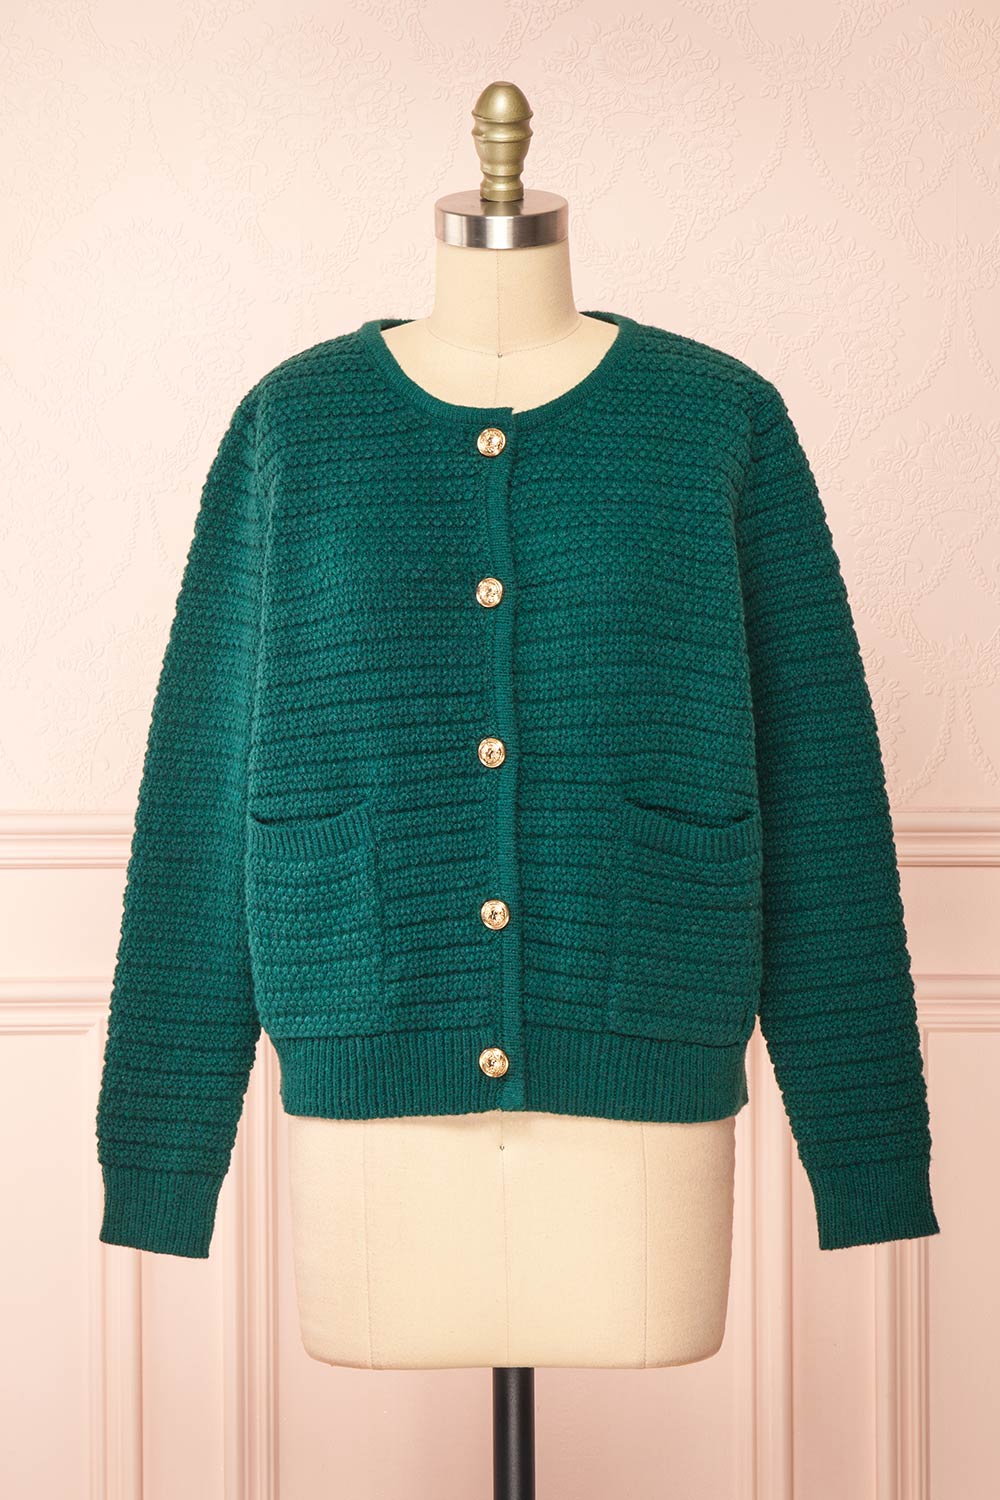 Suzie Green Oversized Knit Cardigan | Boutique 1861 front view